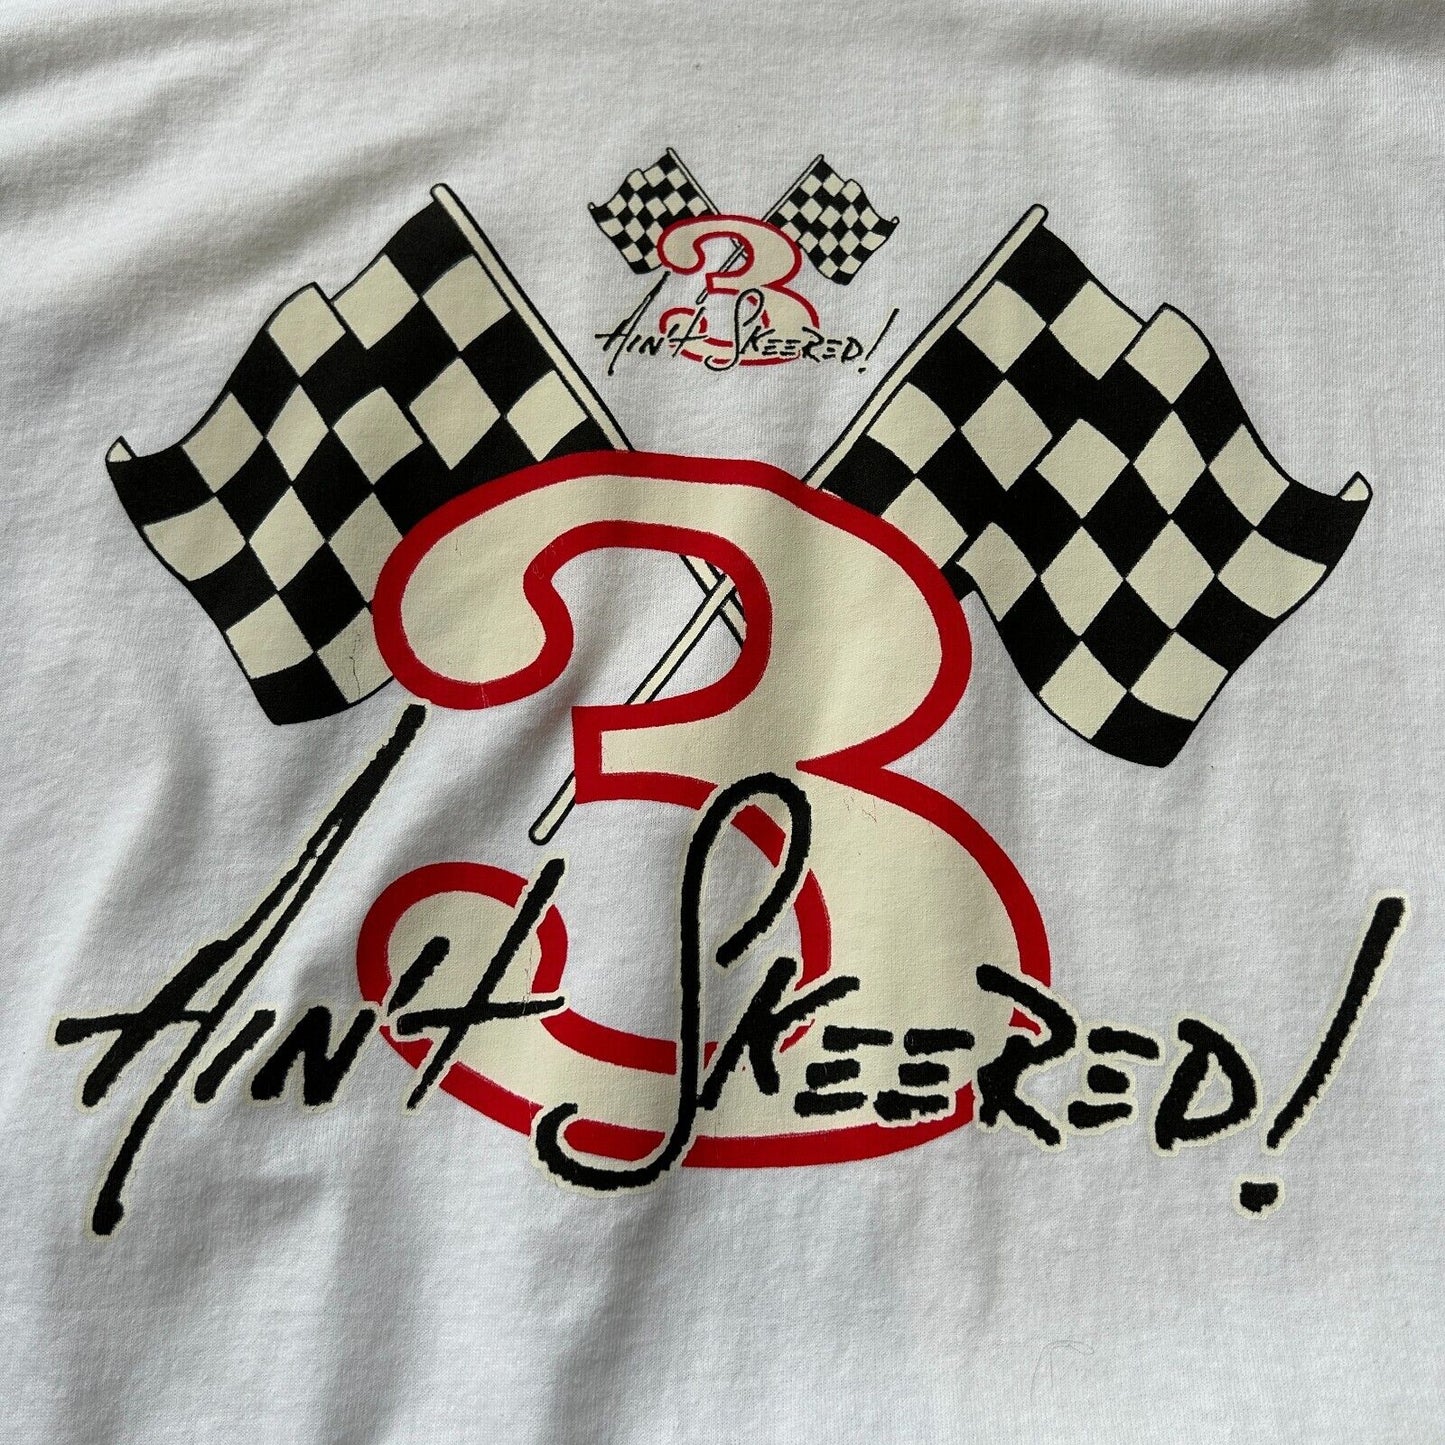 VINTAGE 1997 | Aint Skee Red! Racing Flags White T-Shirt sz XL Adult